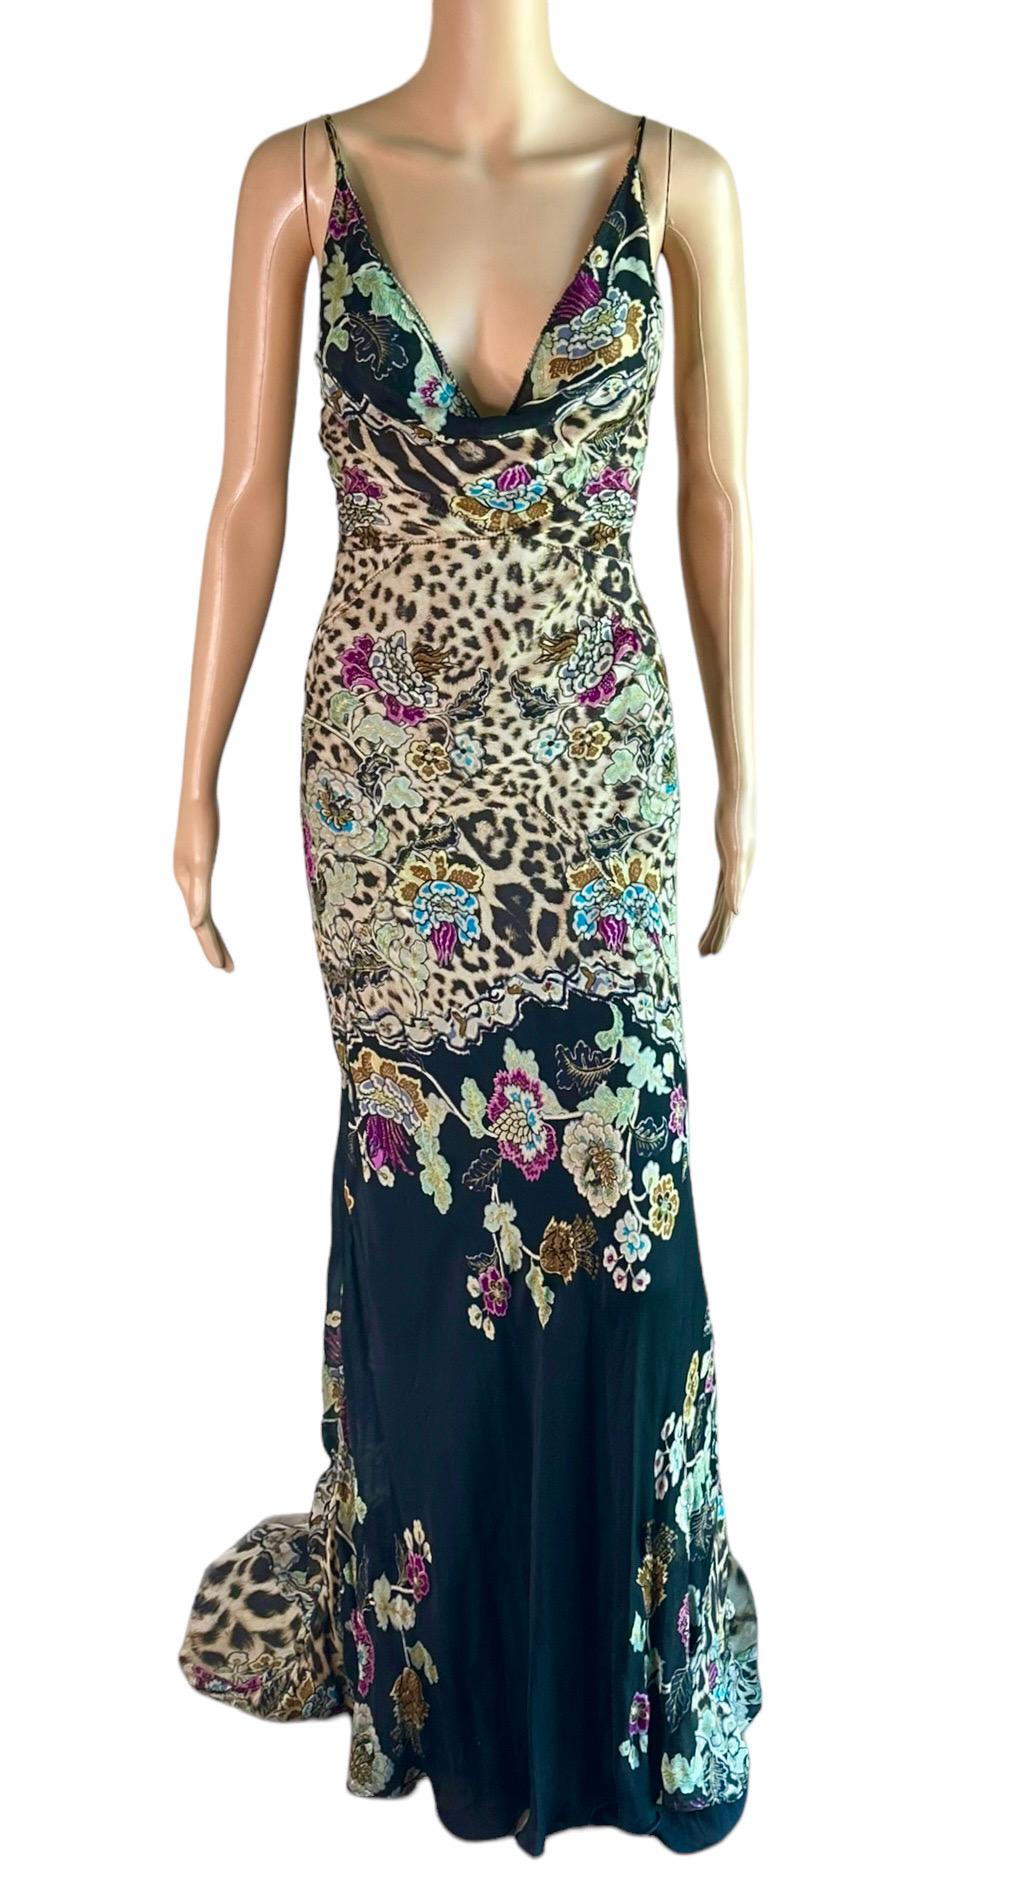 Roberto Cavalli S/S 2003 Chinoiserie Print Silk Train Maxi Evening Dress Gown 2 Piece

Roberto Cavalli semi-sheer chinoiserie print silk maxi dress featuring an floral & leopard print upper layer that could be worn with or without the removable